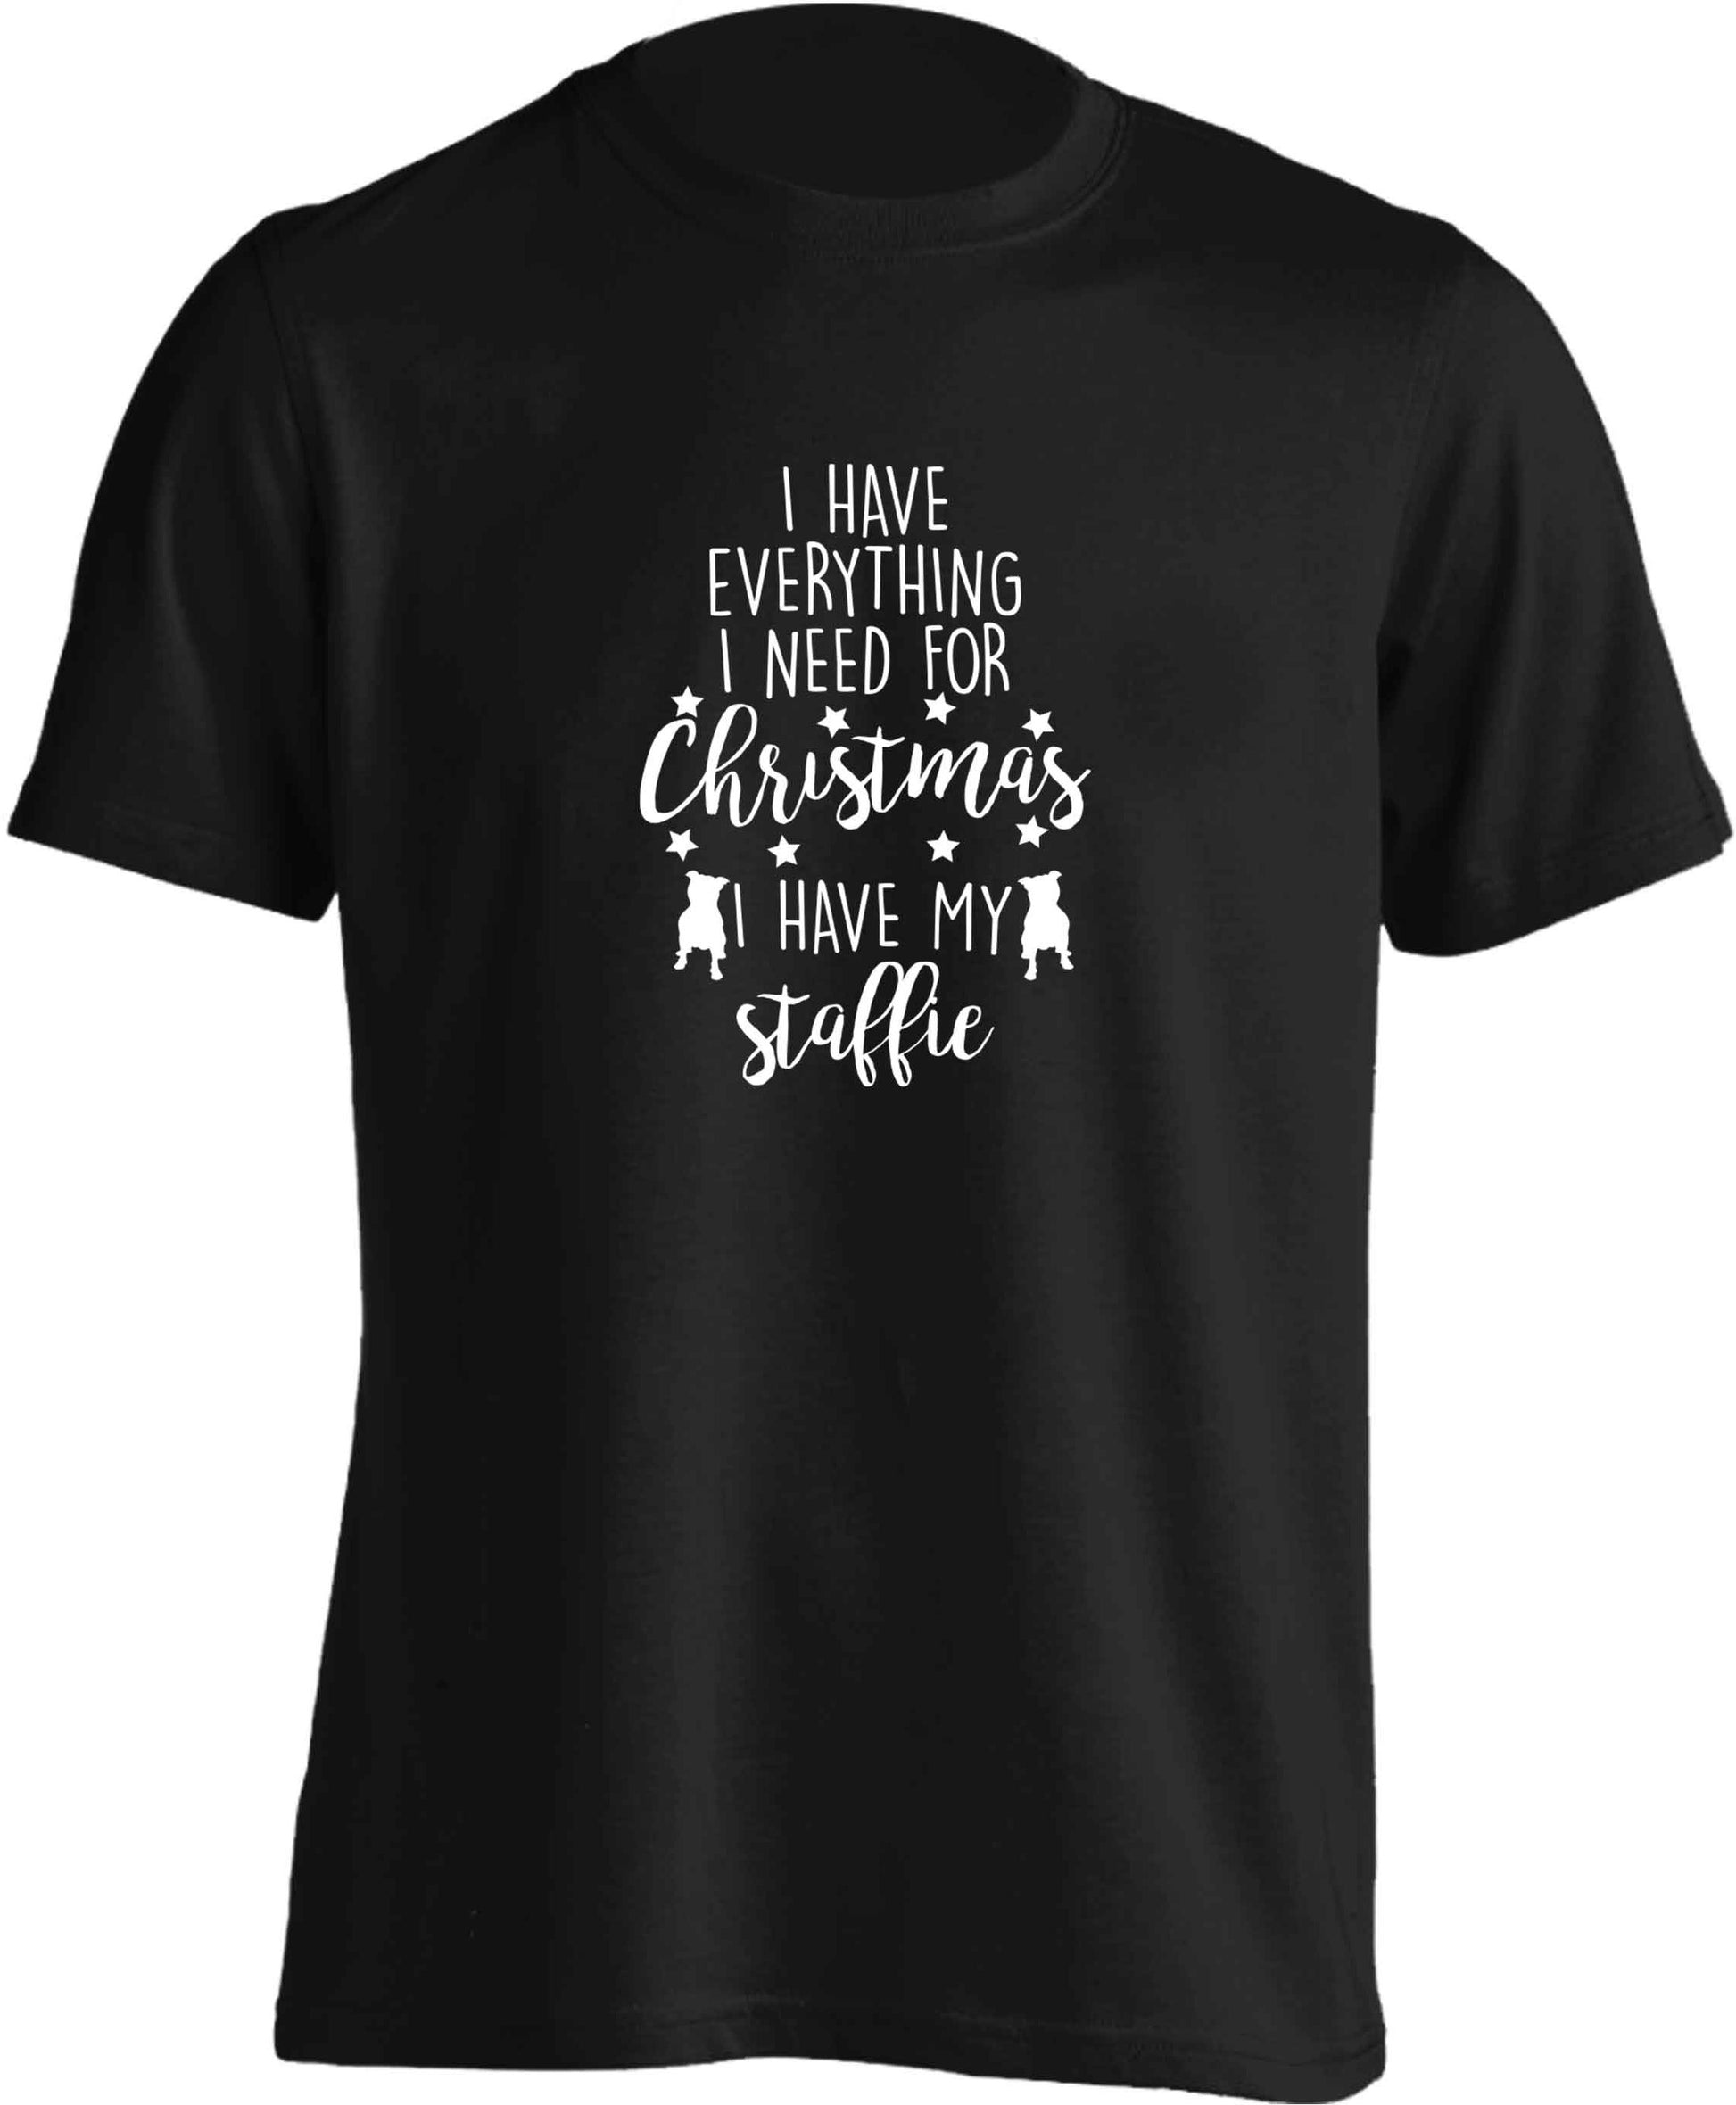 I have everything I need for Christmas I have my staffie adults unisex black Tshirt 2XL